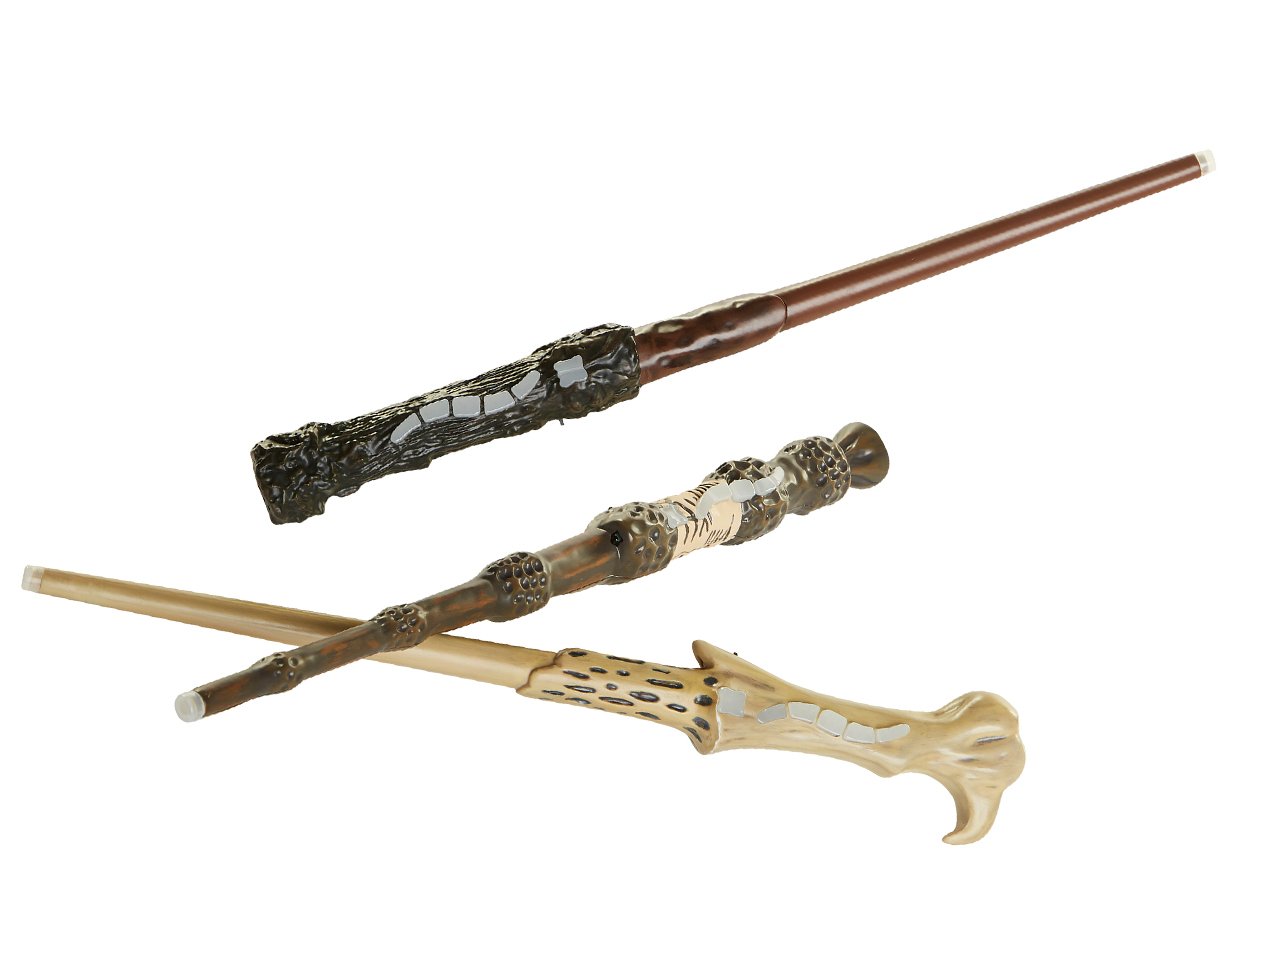 Become A Wizard With Harry Potter Wizard Training Wands The Toy Insider